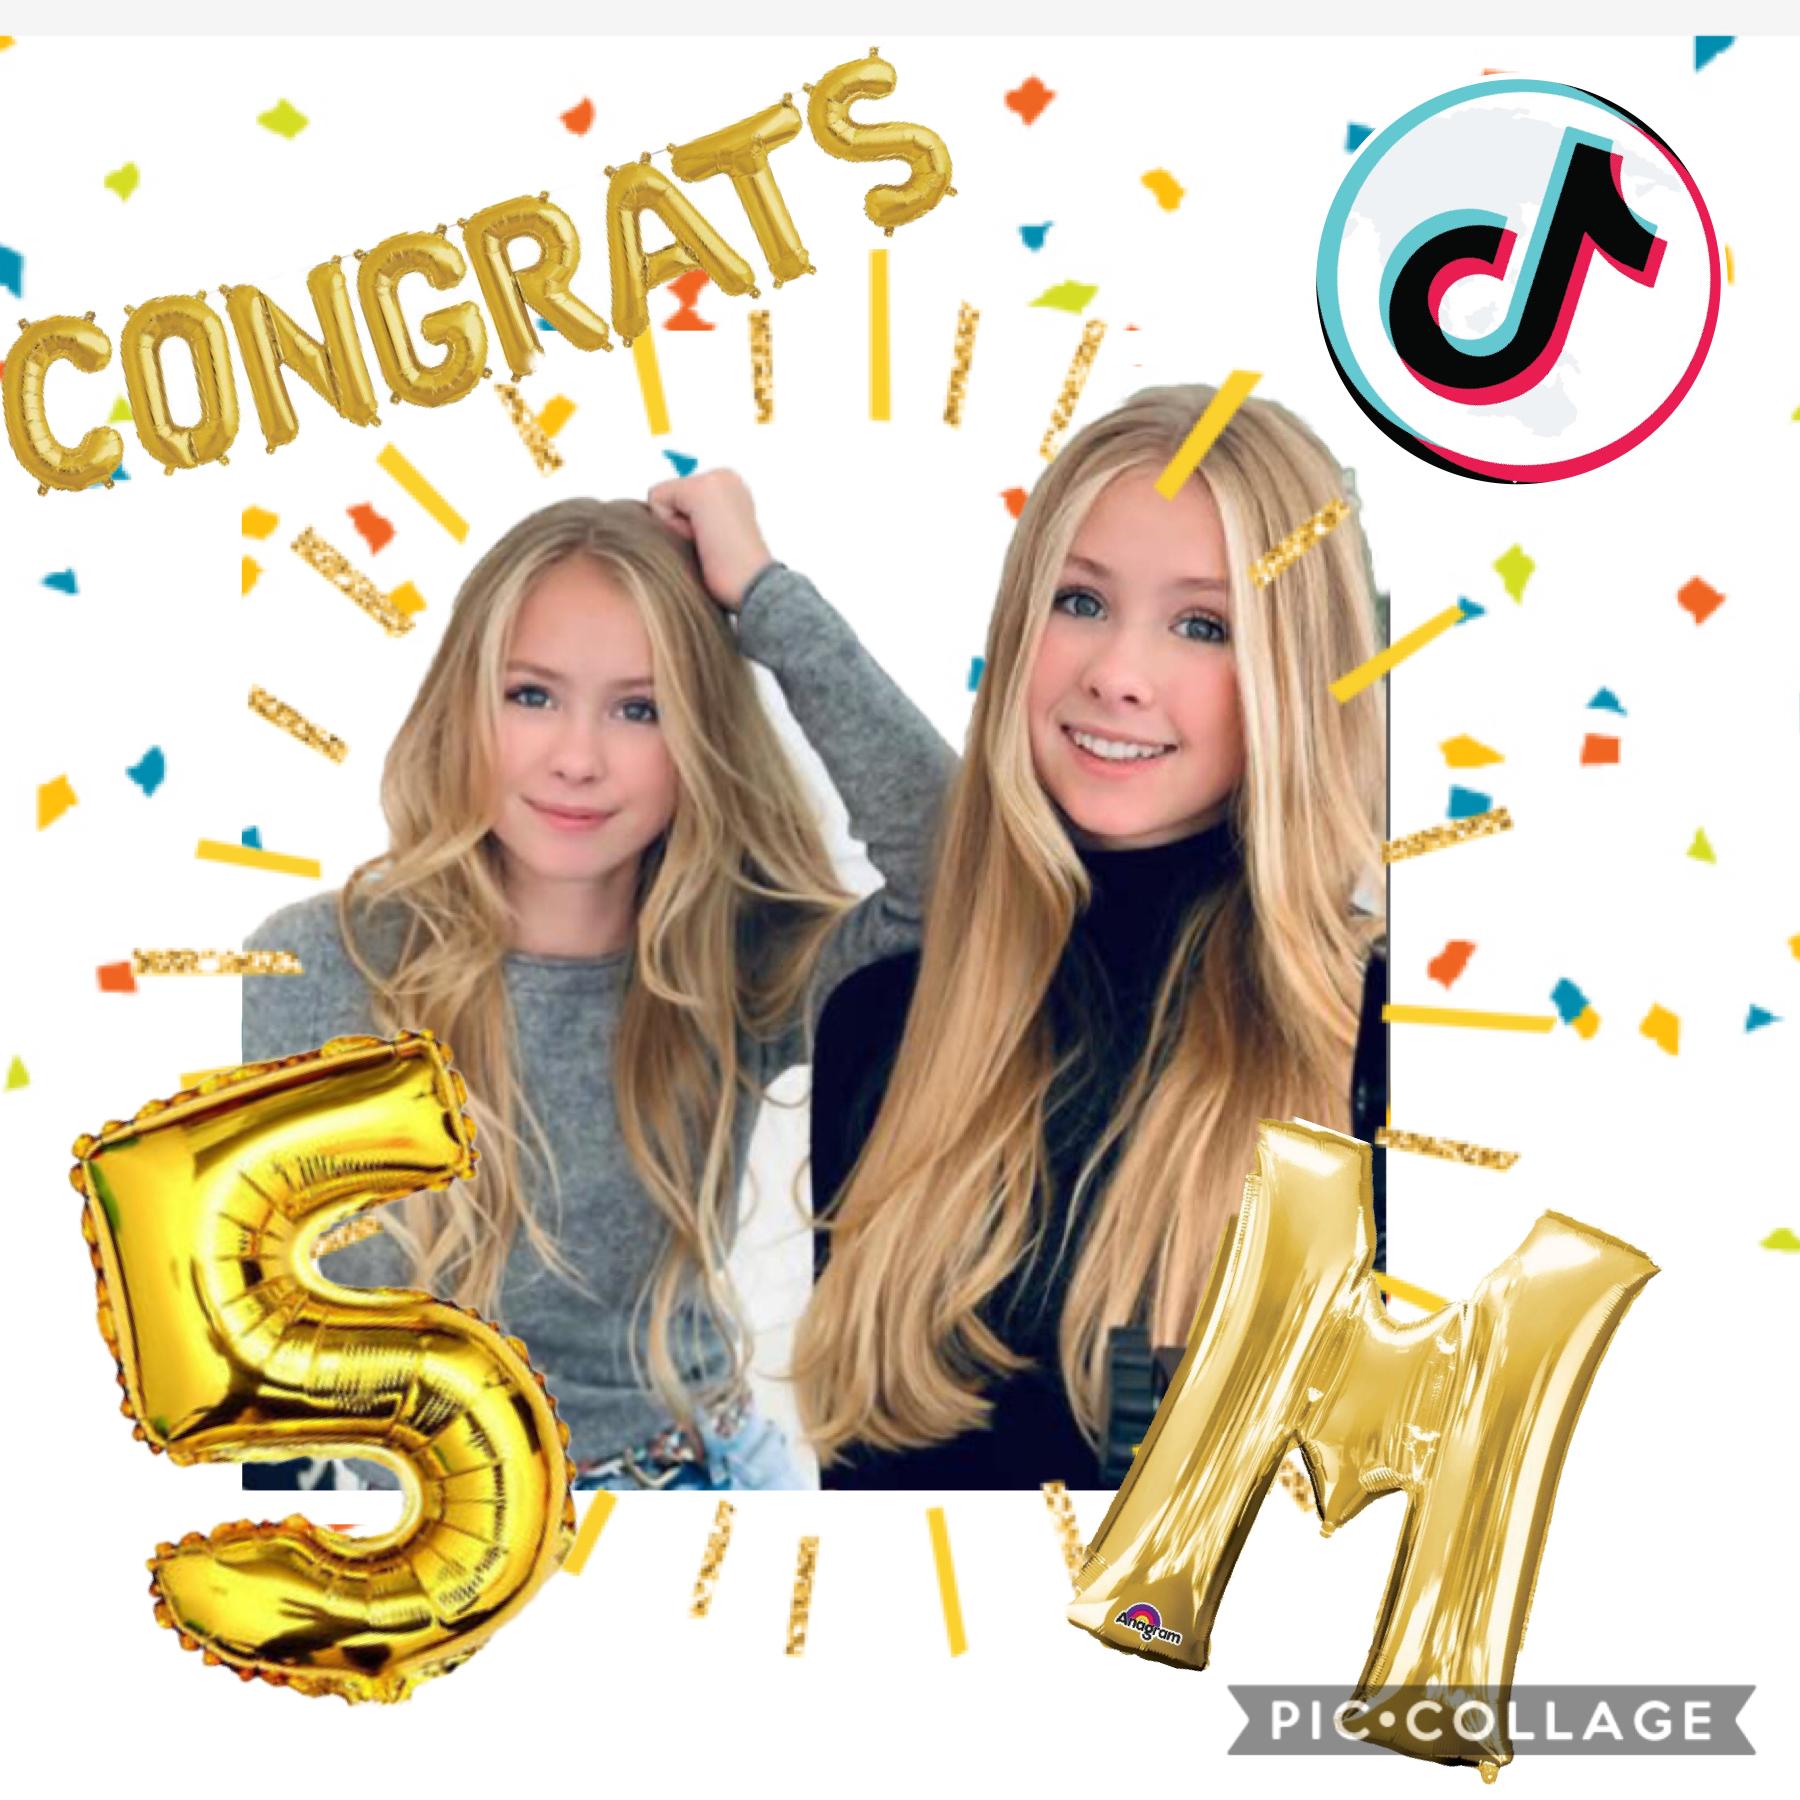 TY for five million followers on tik tok we love you guys so much ❤️❤️❤️